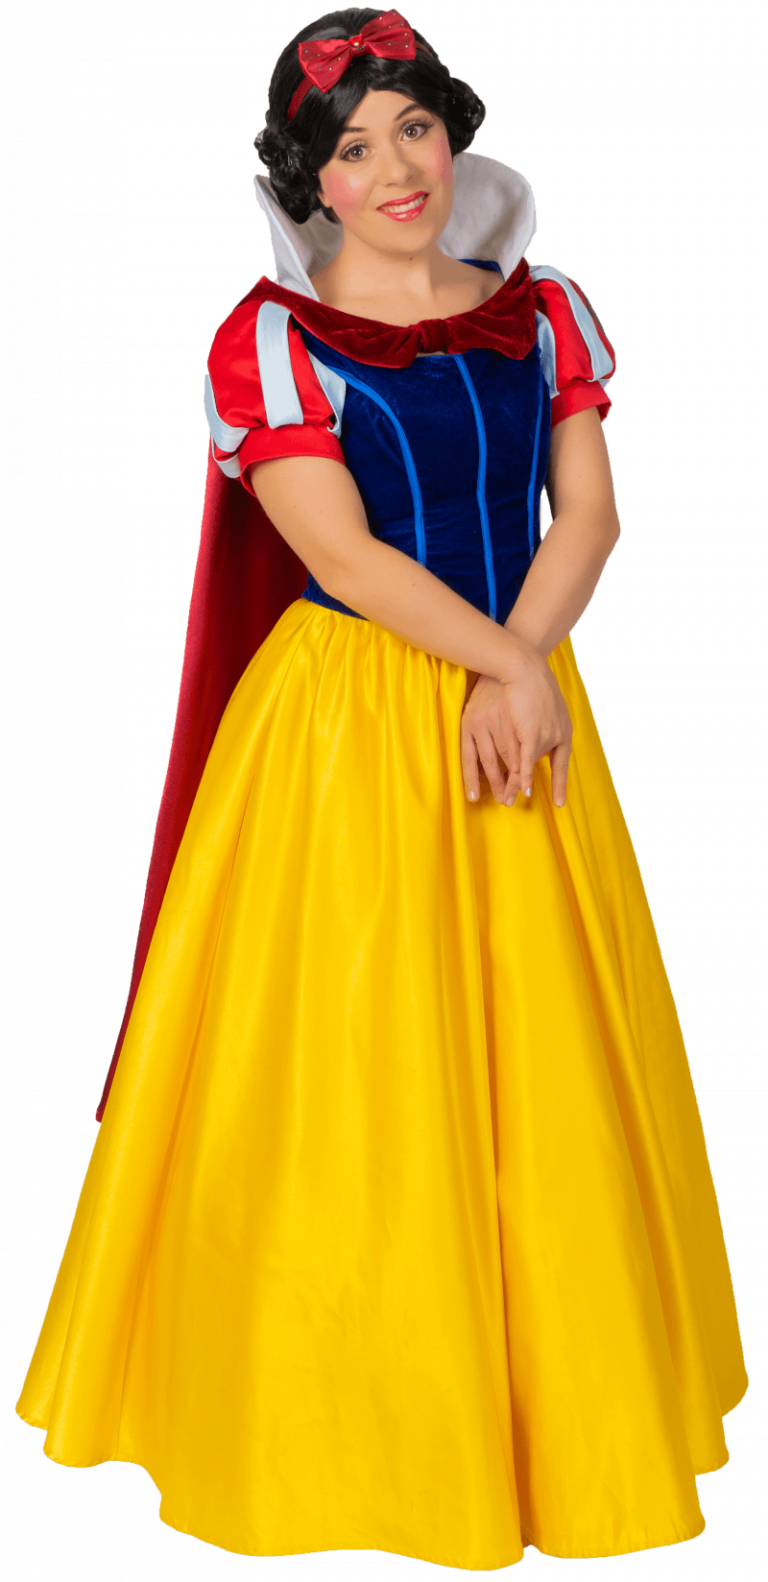 Snow White Princess Character for Parties | Book a Princess!